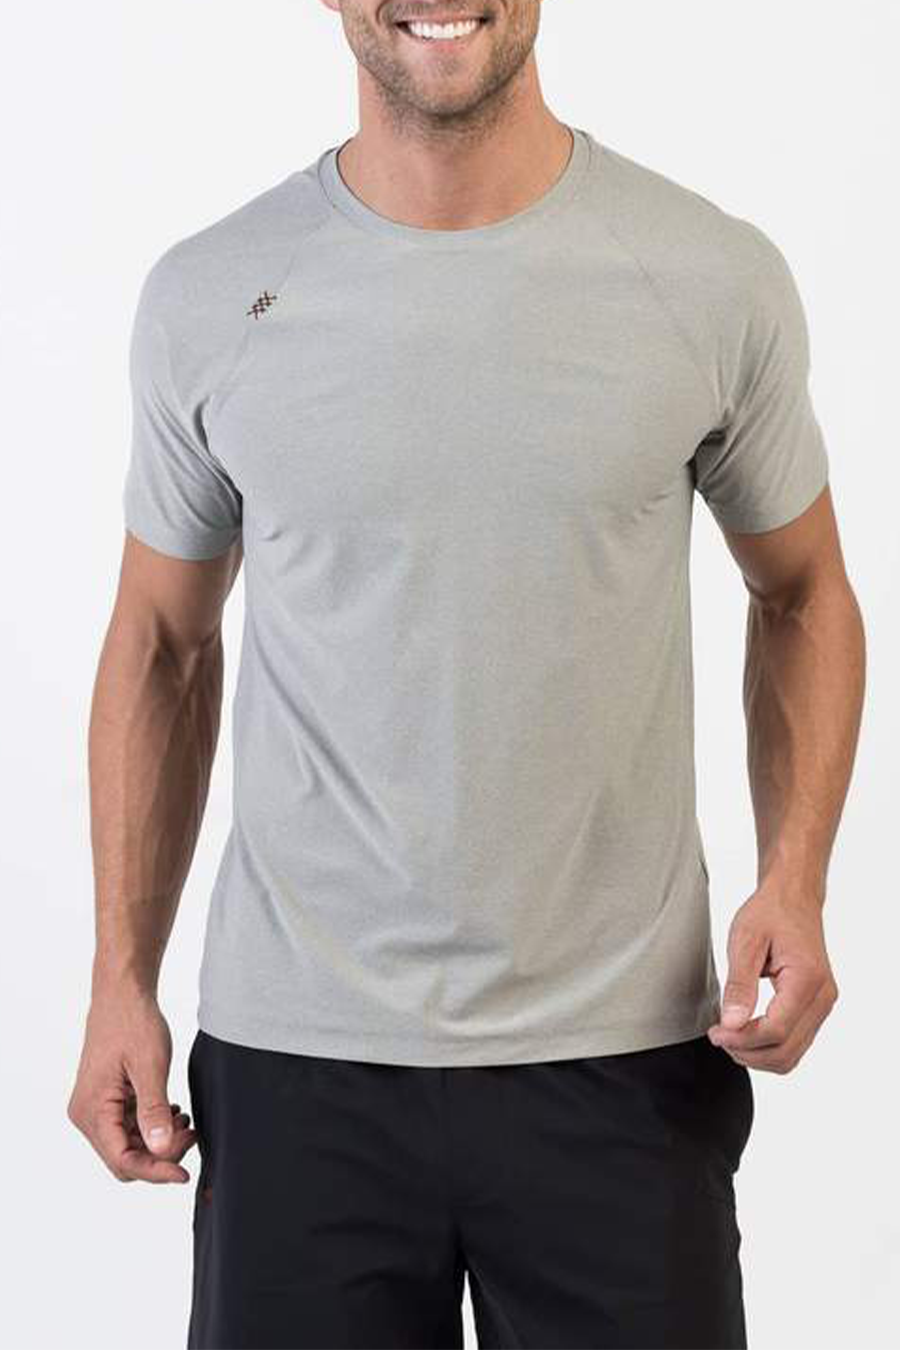 Reign Short Sleeve | Light Heather Gray - Main Image Number 1 of 3